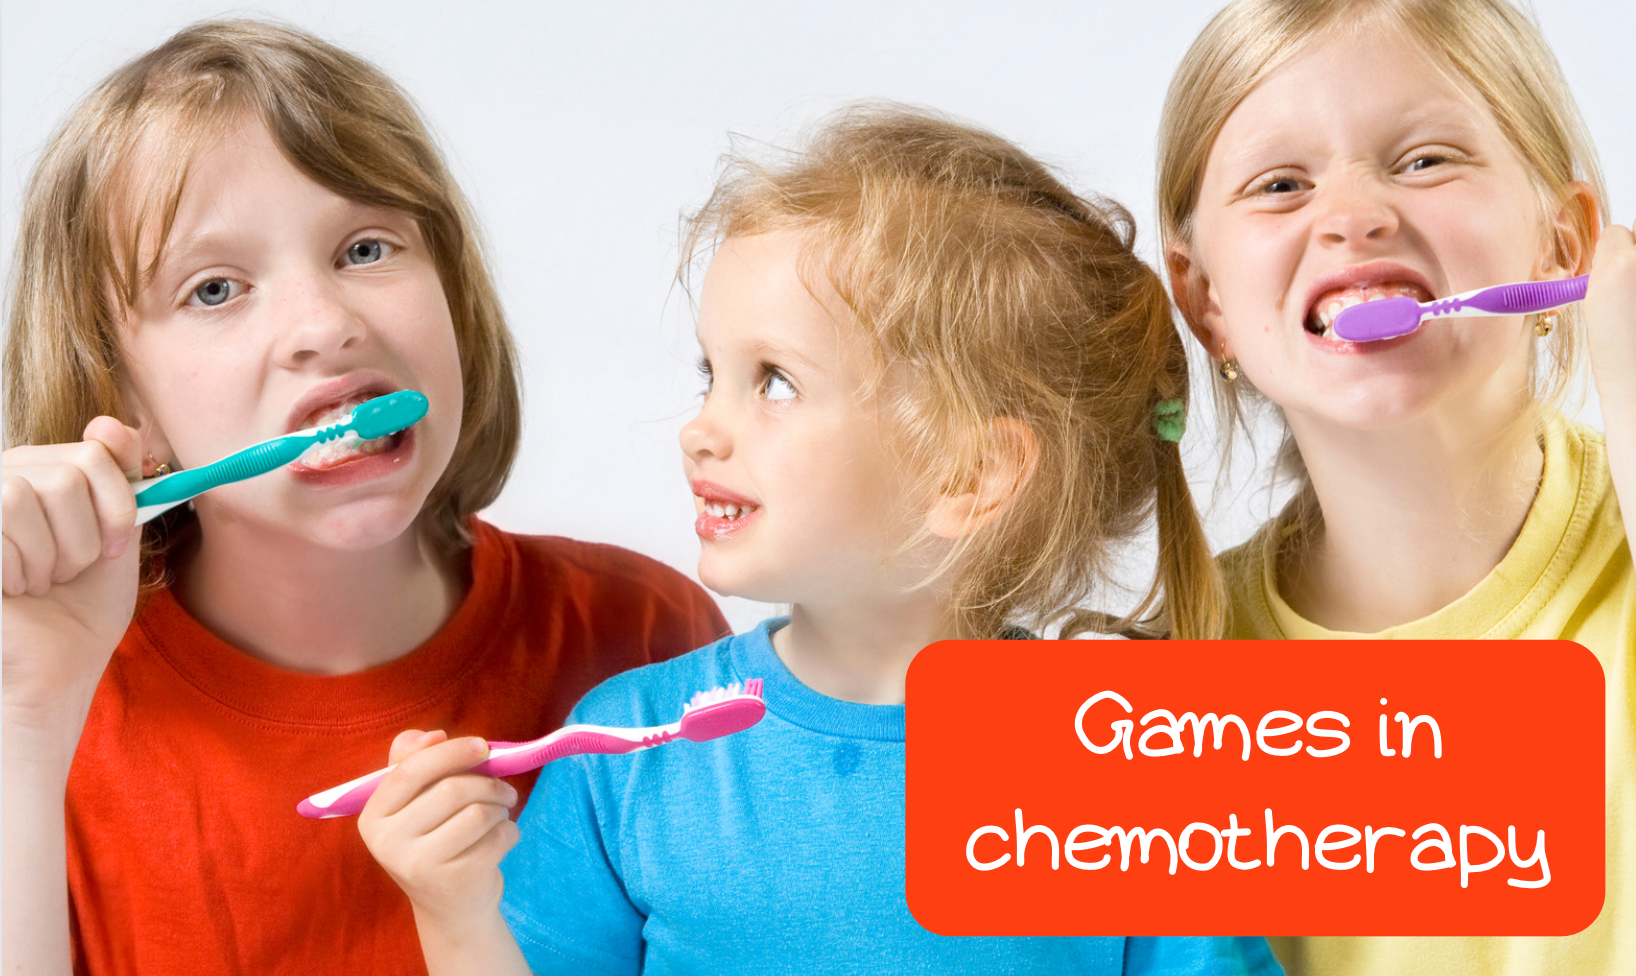 Games and video presentations to prevent oral mucositis in children on chemotherapy!